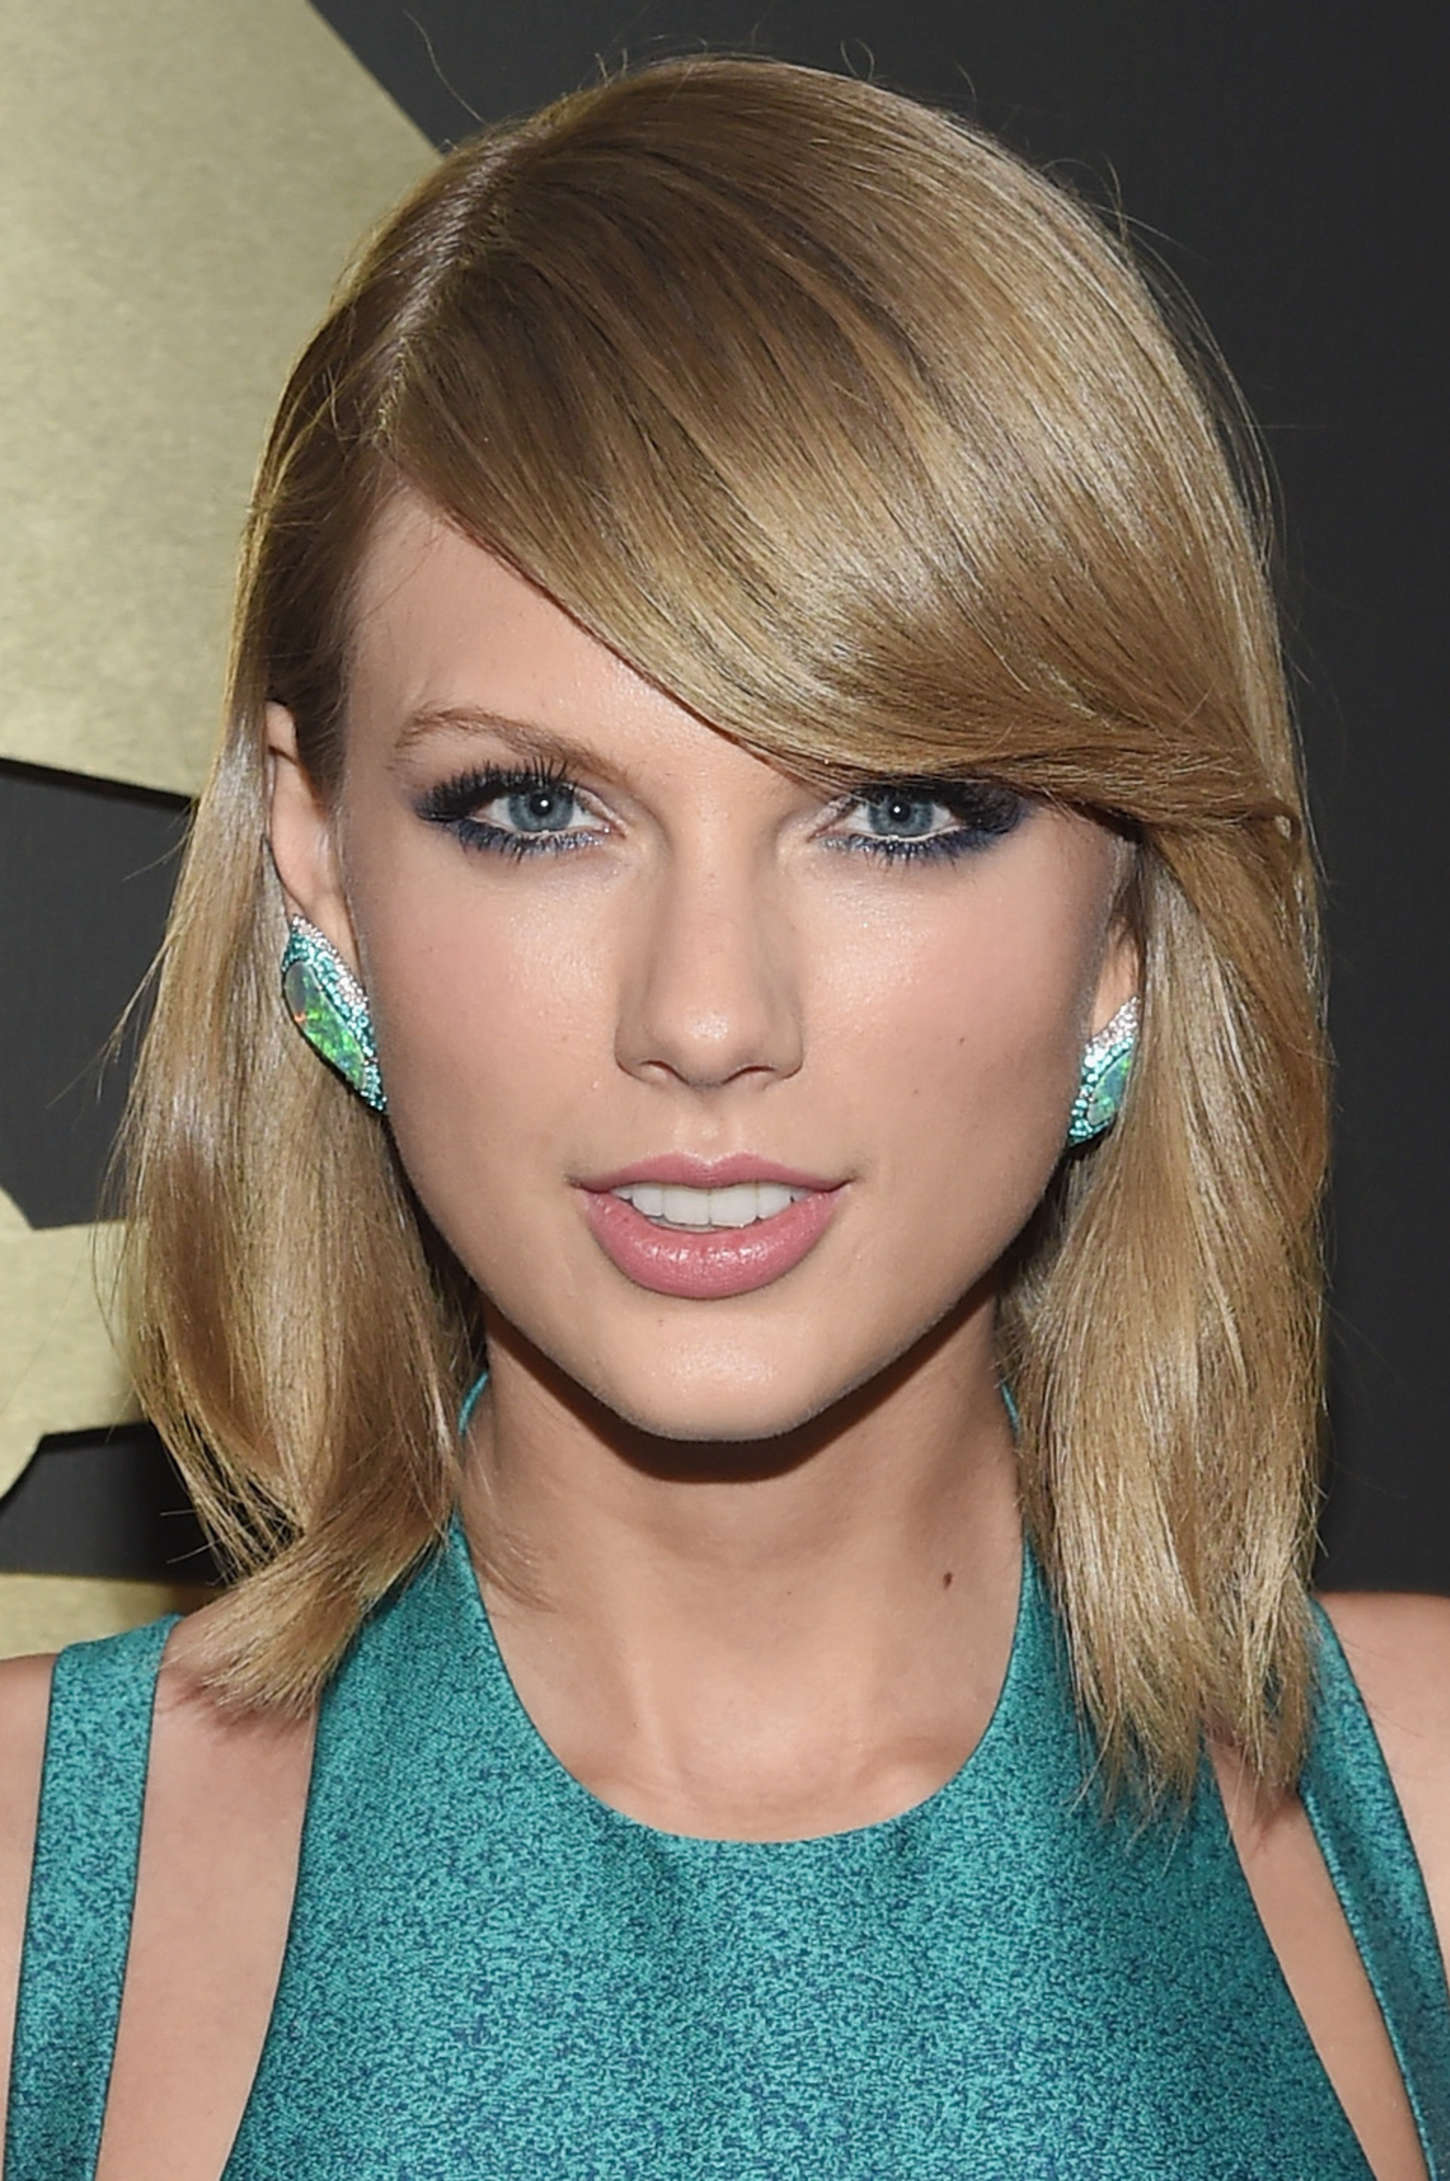 taylor swift iphone wallpaper,hair,face,hairstyle,blond,eyebrow